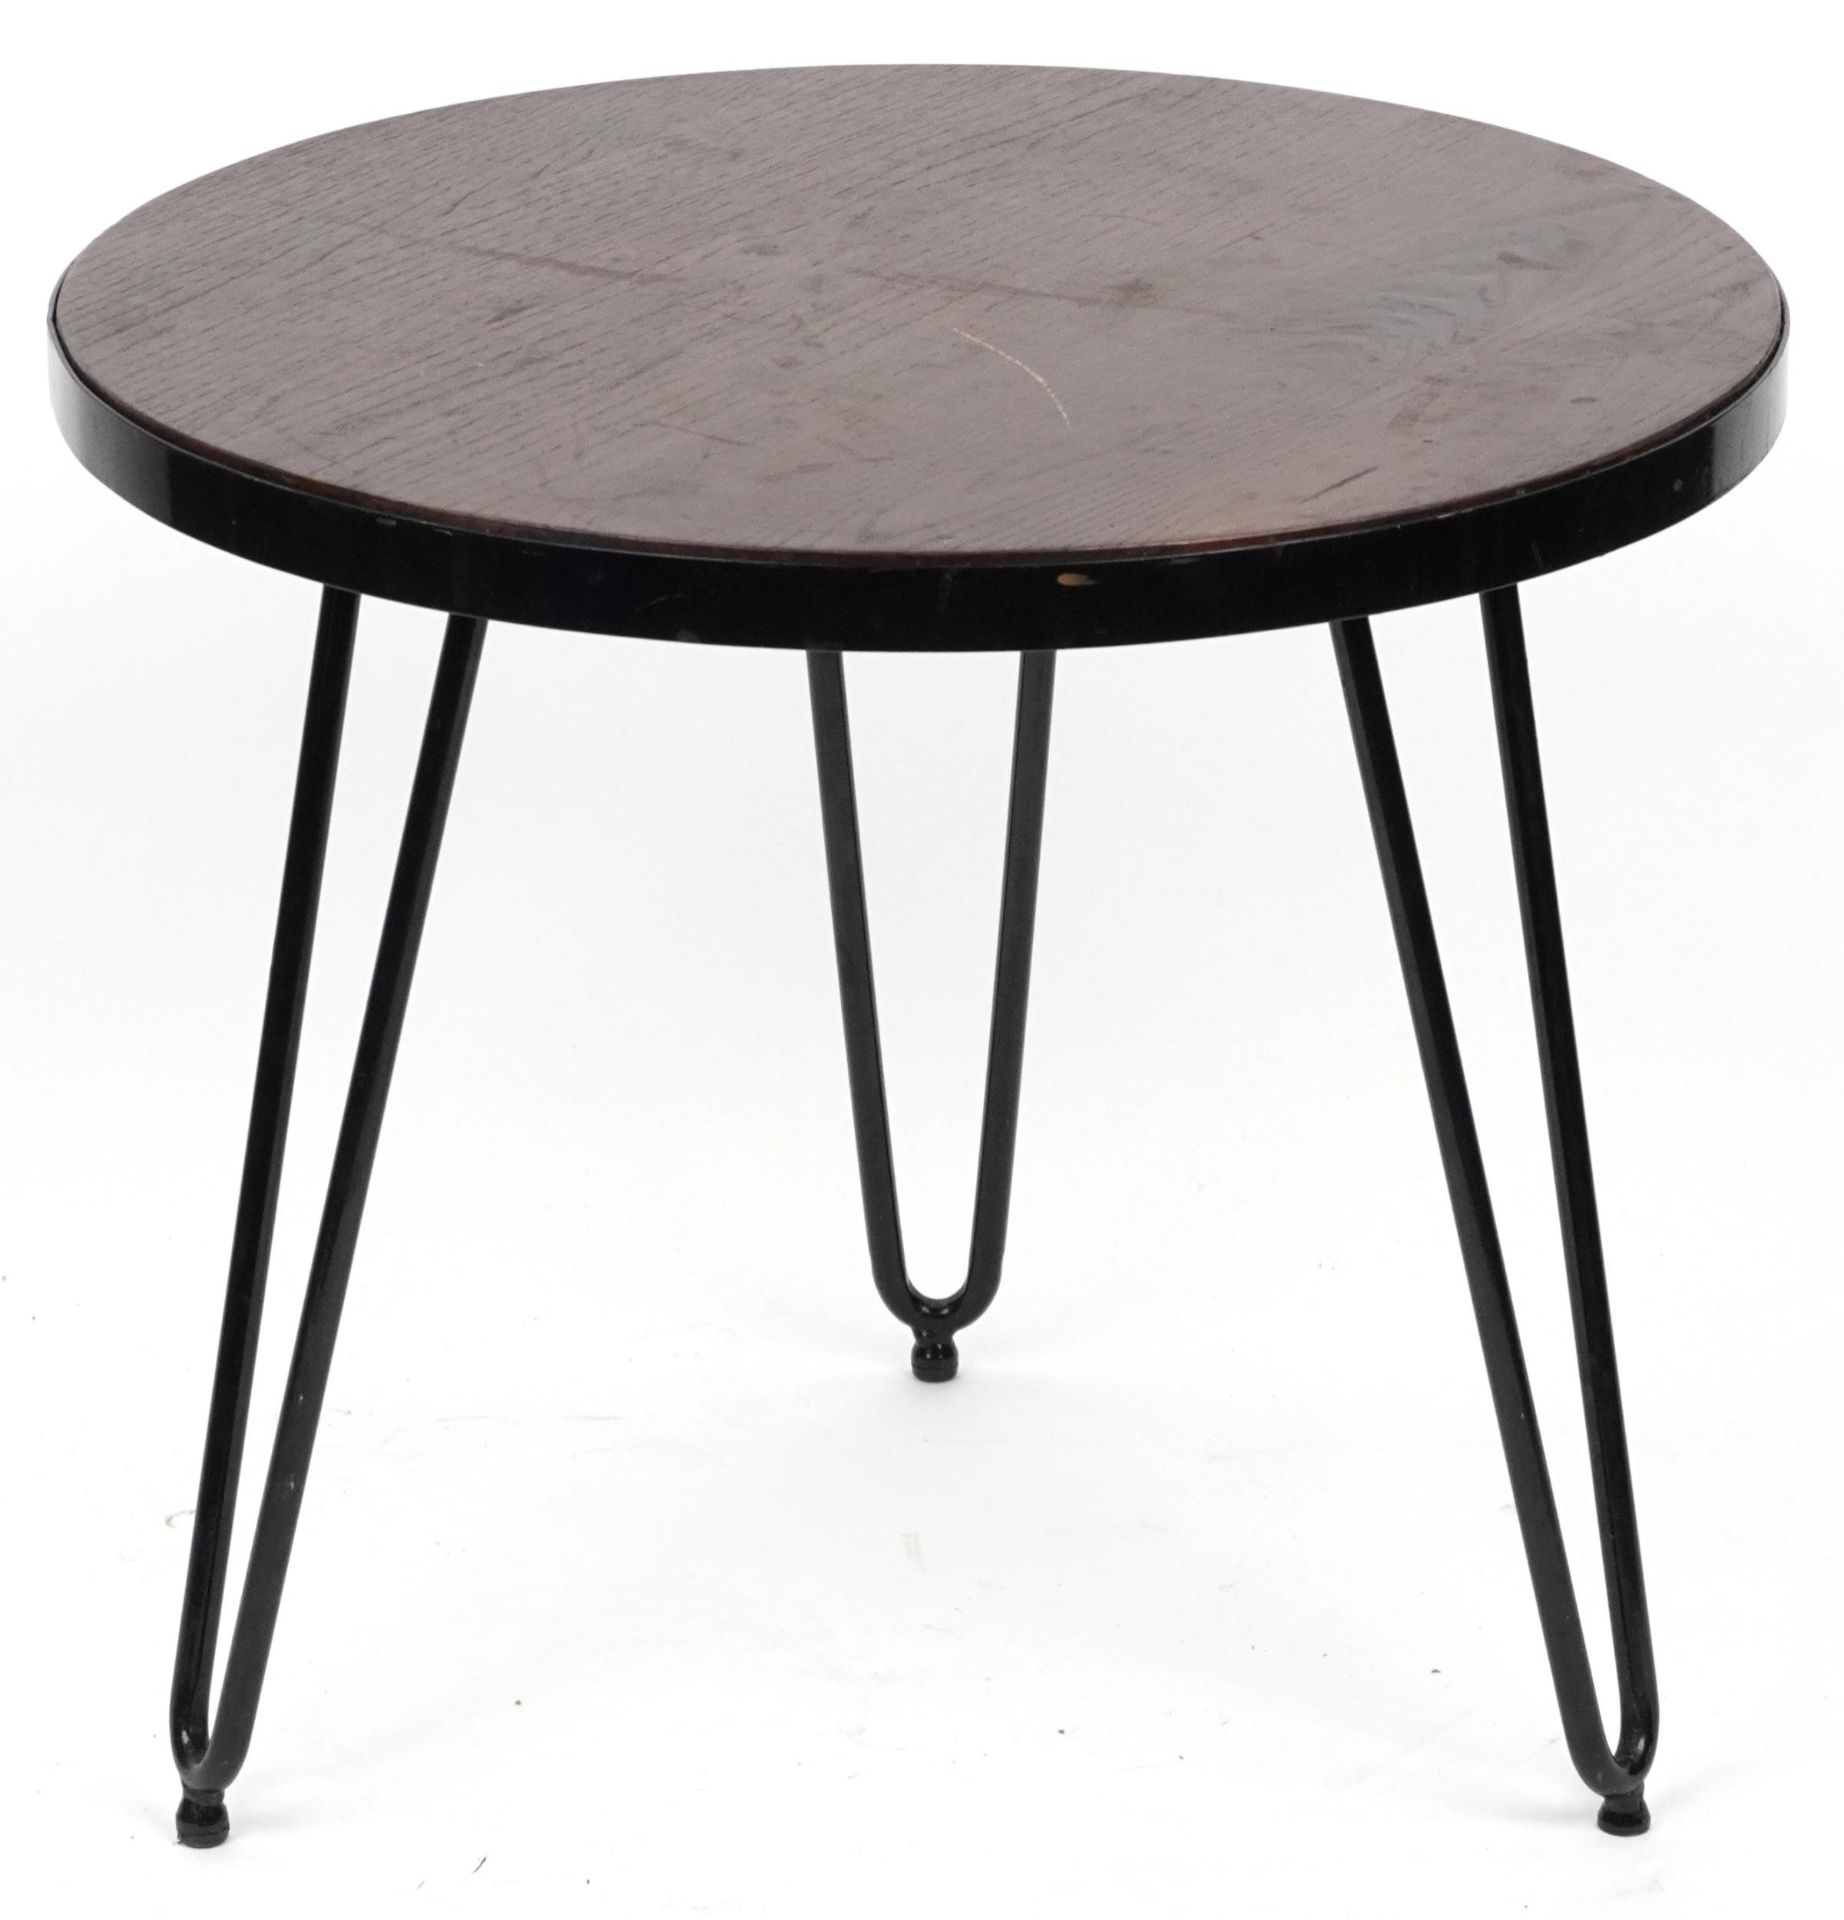 Industrial circular hardwood and wrought iron occasional table with hairpin legs, 53.5cm high x 61cm - Image 3 of 3